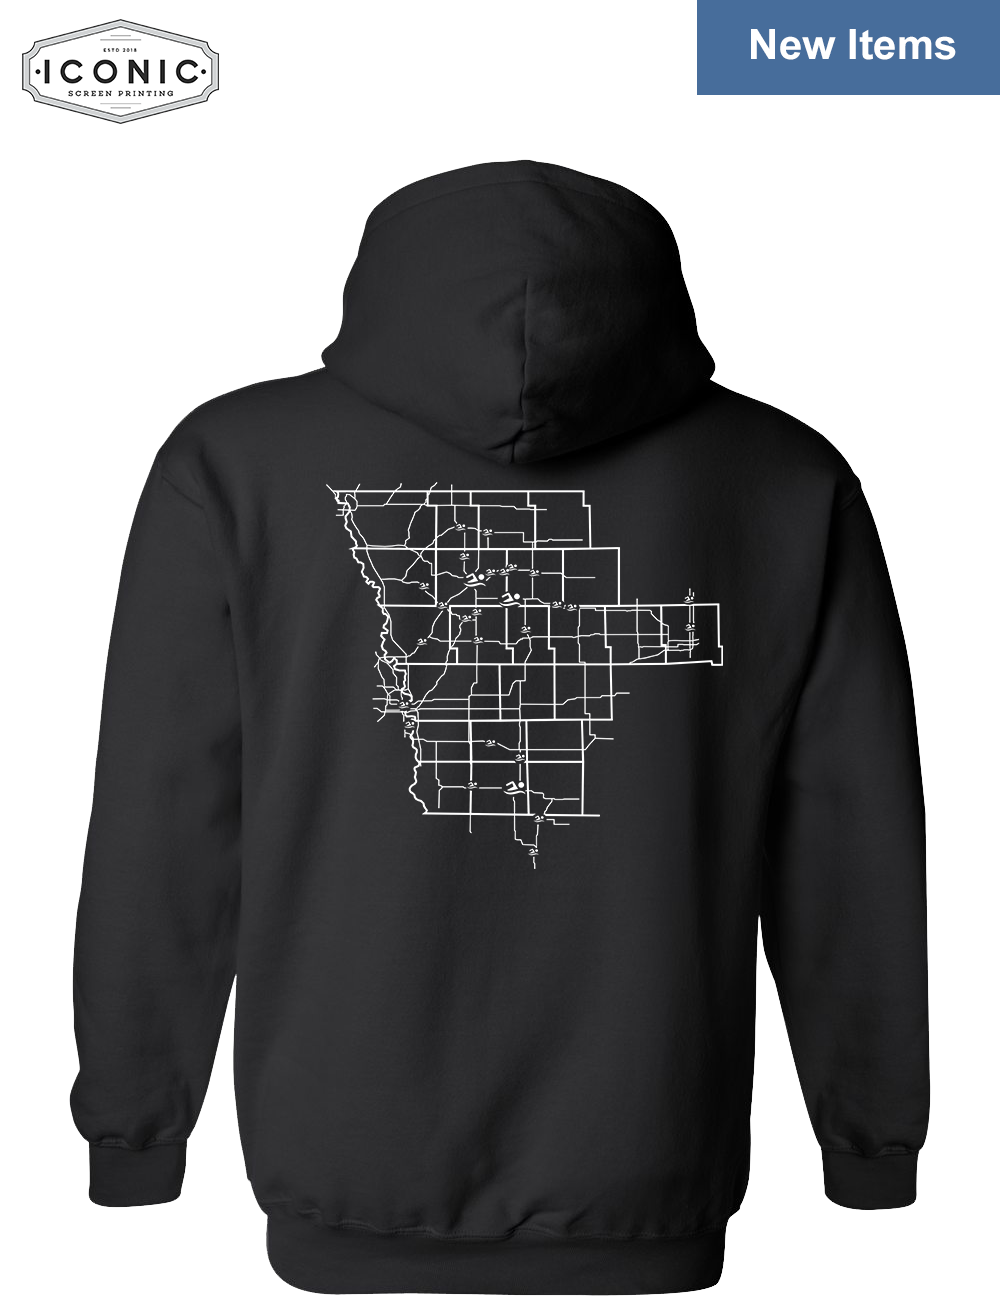 Stingrays with Map - Heavy Blend Hooded Sweatshirt